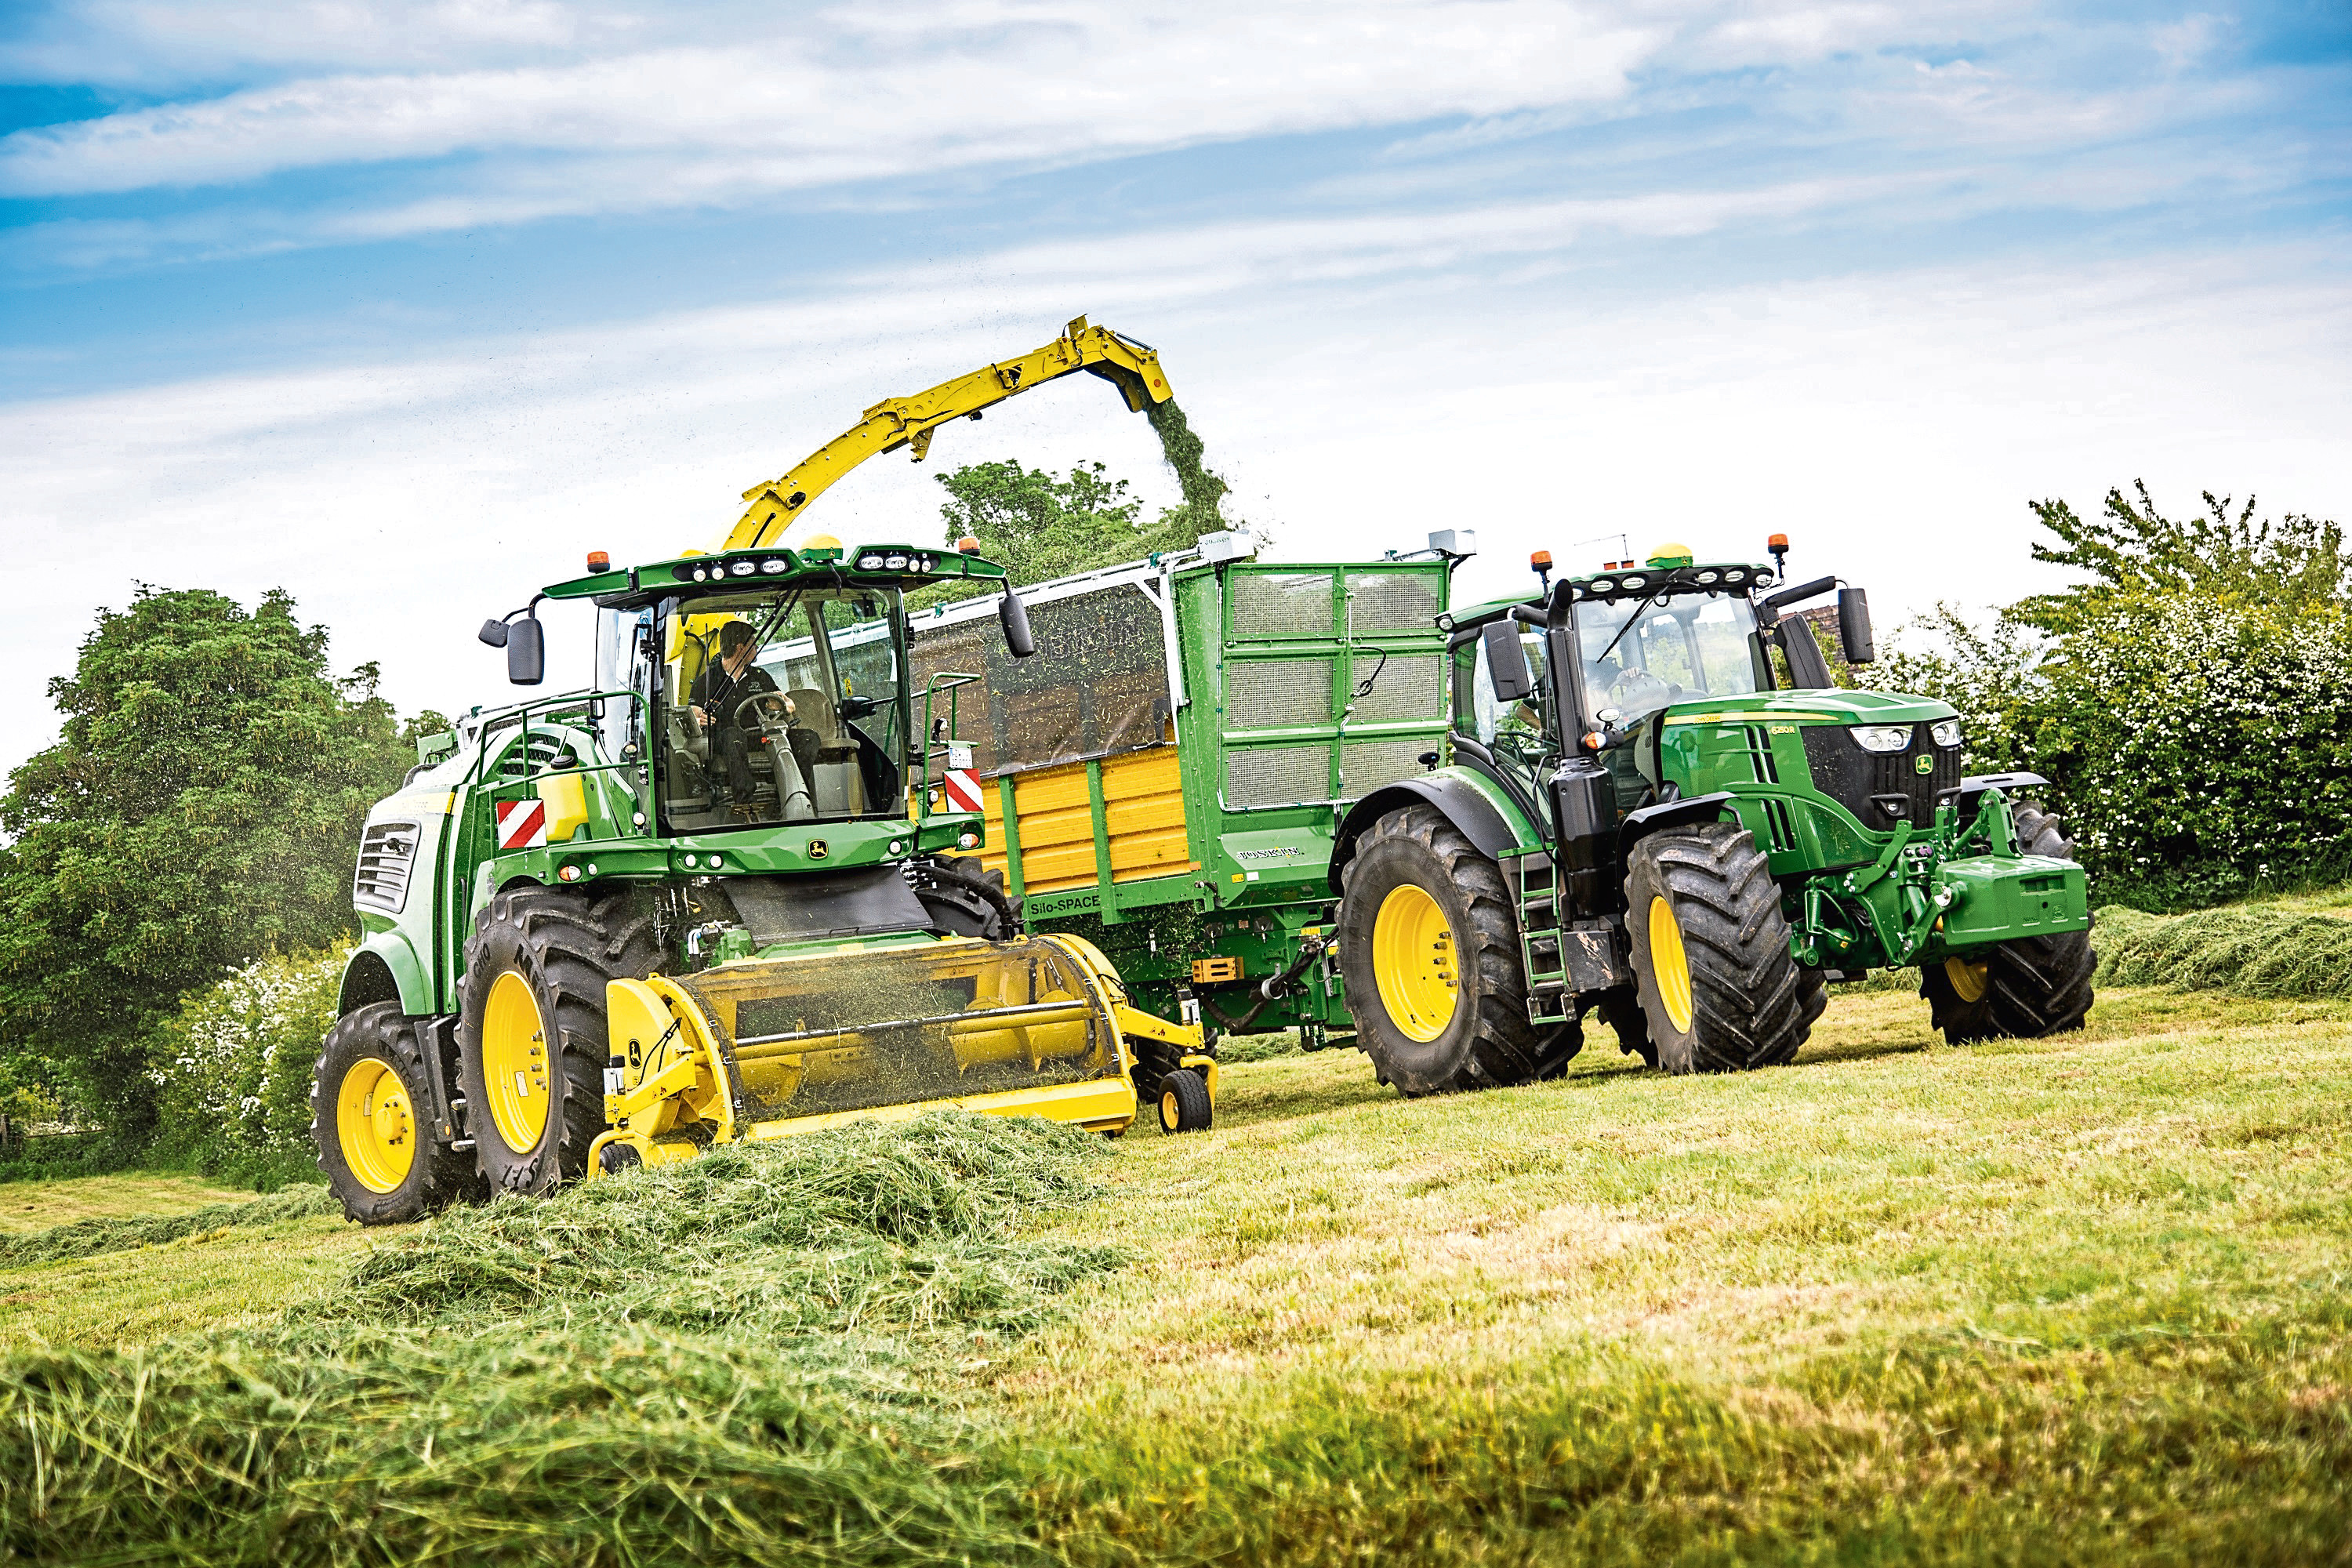 Scottish farmers are still thinking big with tractors like the John Deere 9700i SPFH .